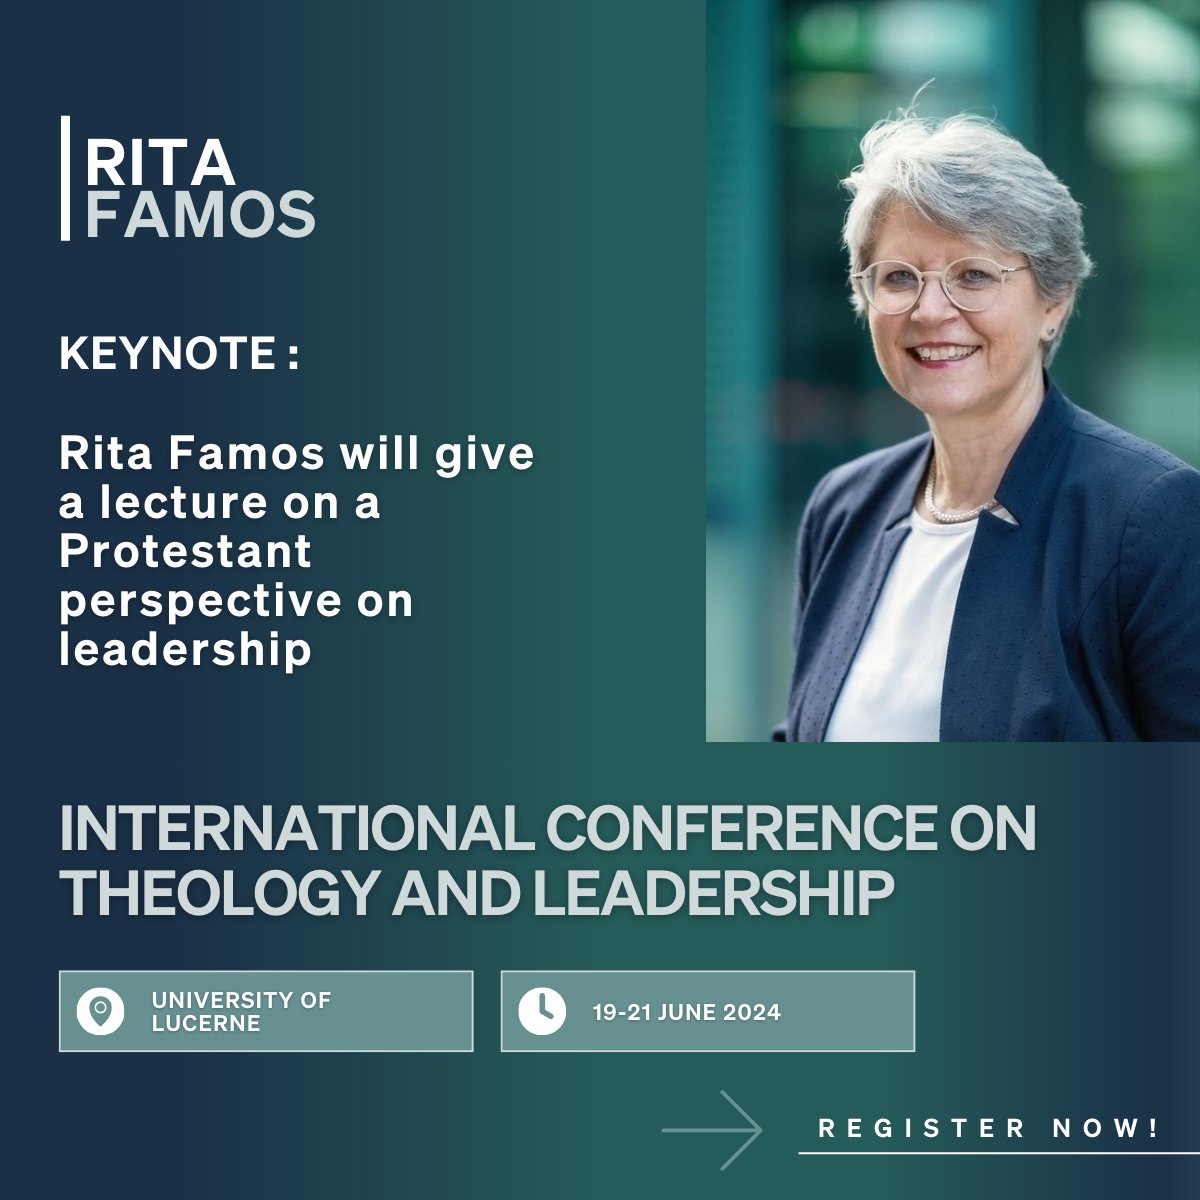 🌟We are thrilled to share that Rita Famos, Pastor and President of the Protestant Church in Switzerland PCS, has confirmed as a keynote speaker at the upcoming International Conference on Theology and Leadership! Register now for the conference: unilu.ch/ictl2024